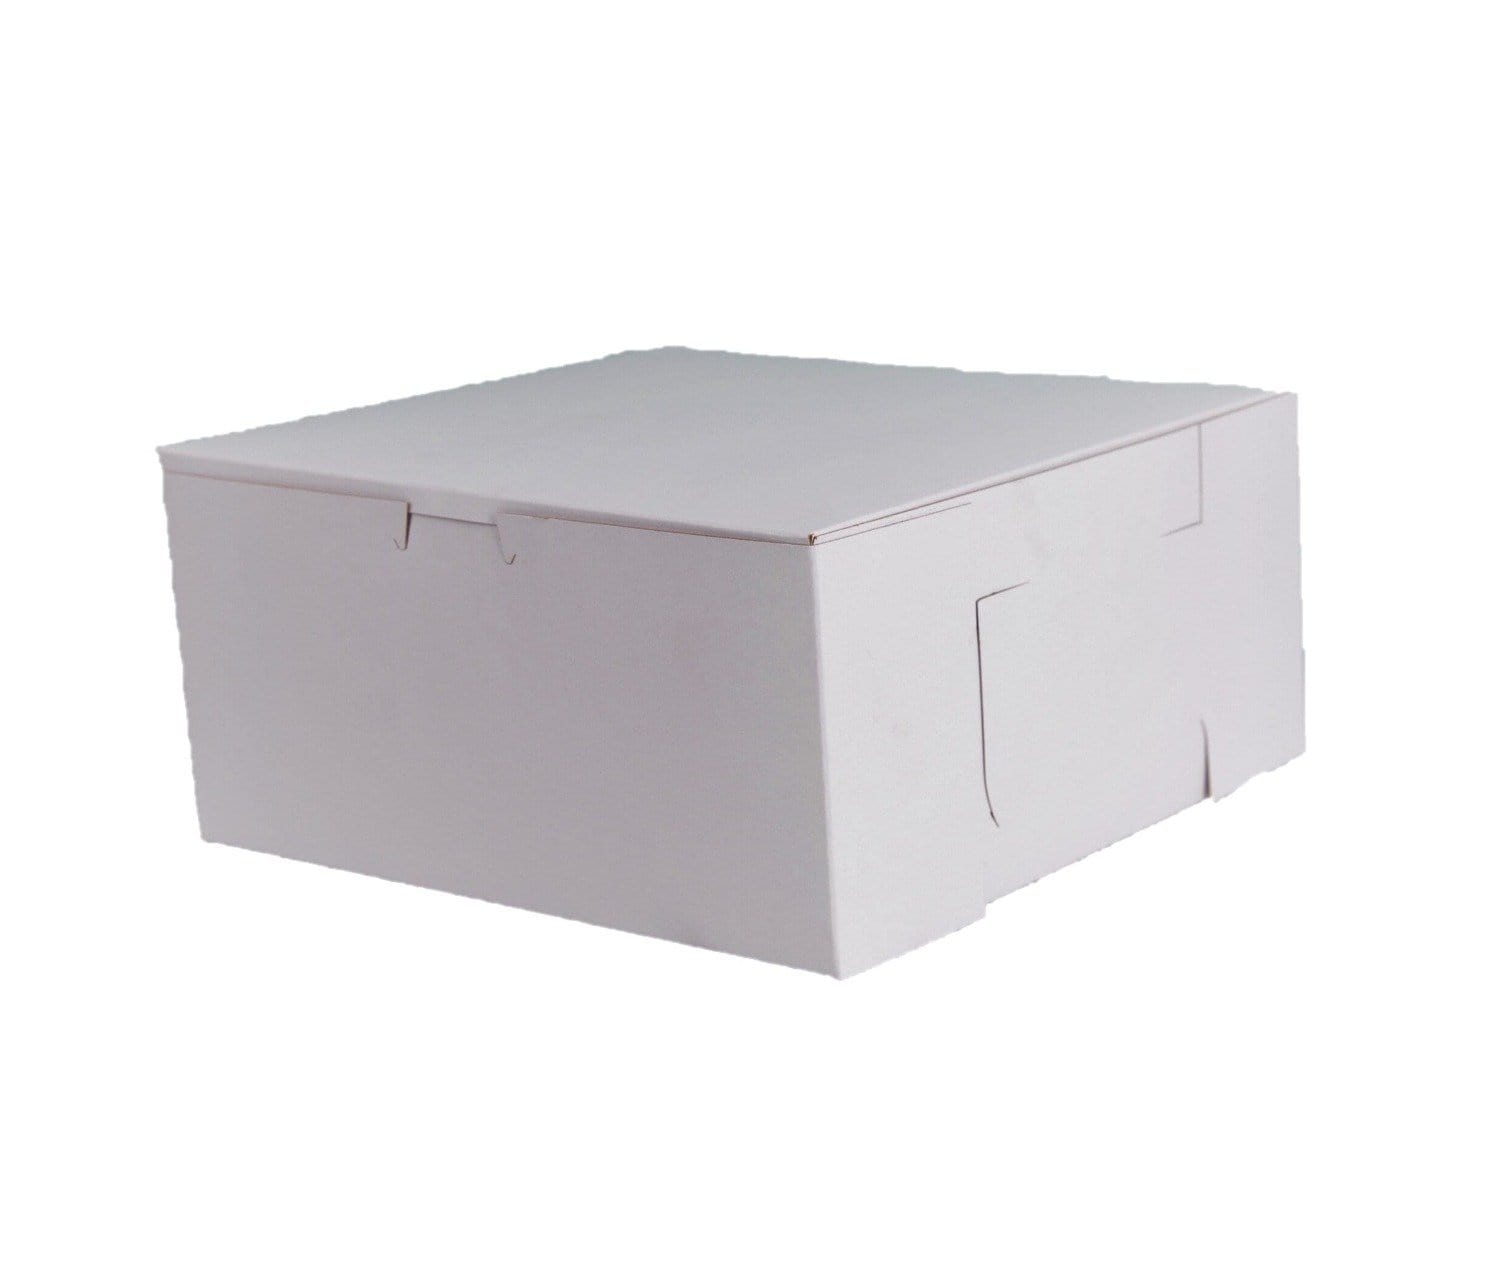 CB 1000 D 2 Compartment Food Container with Lid - 500PCS